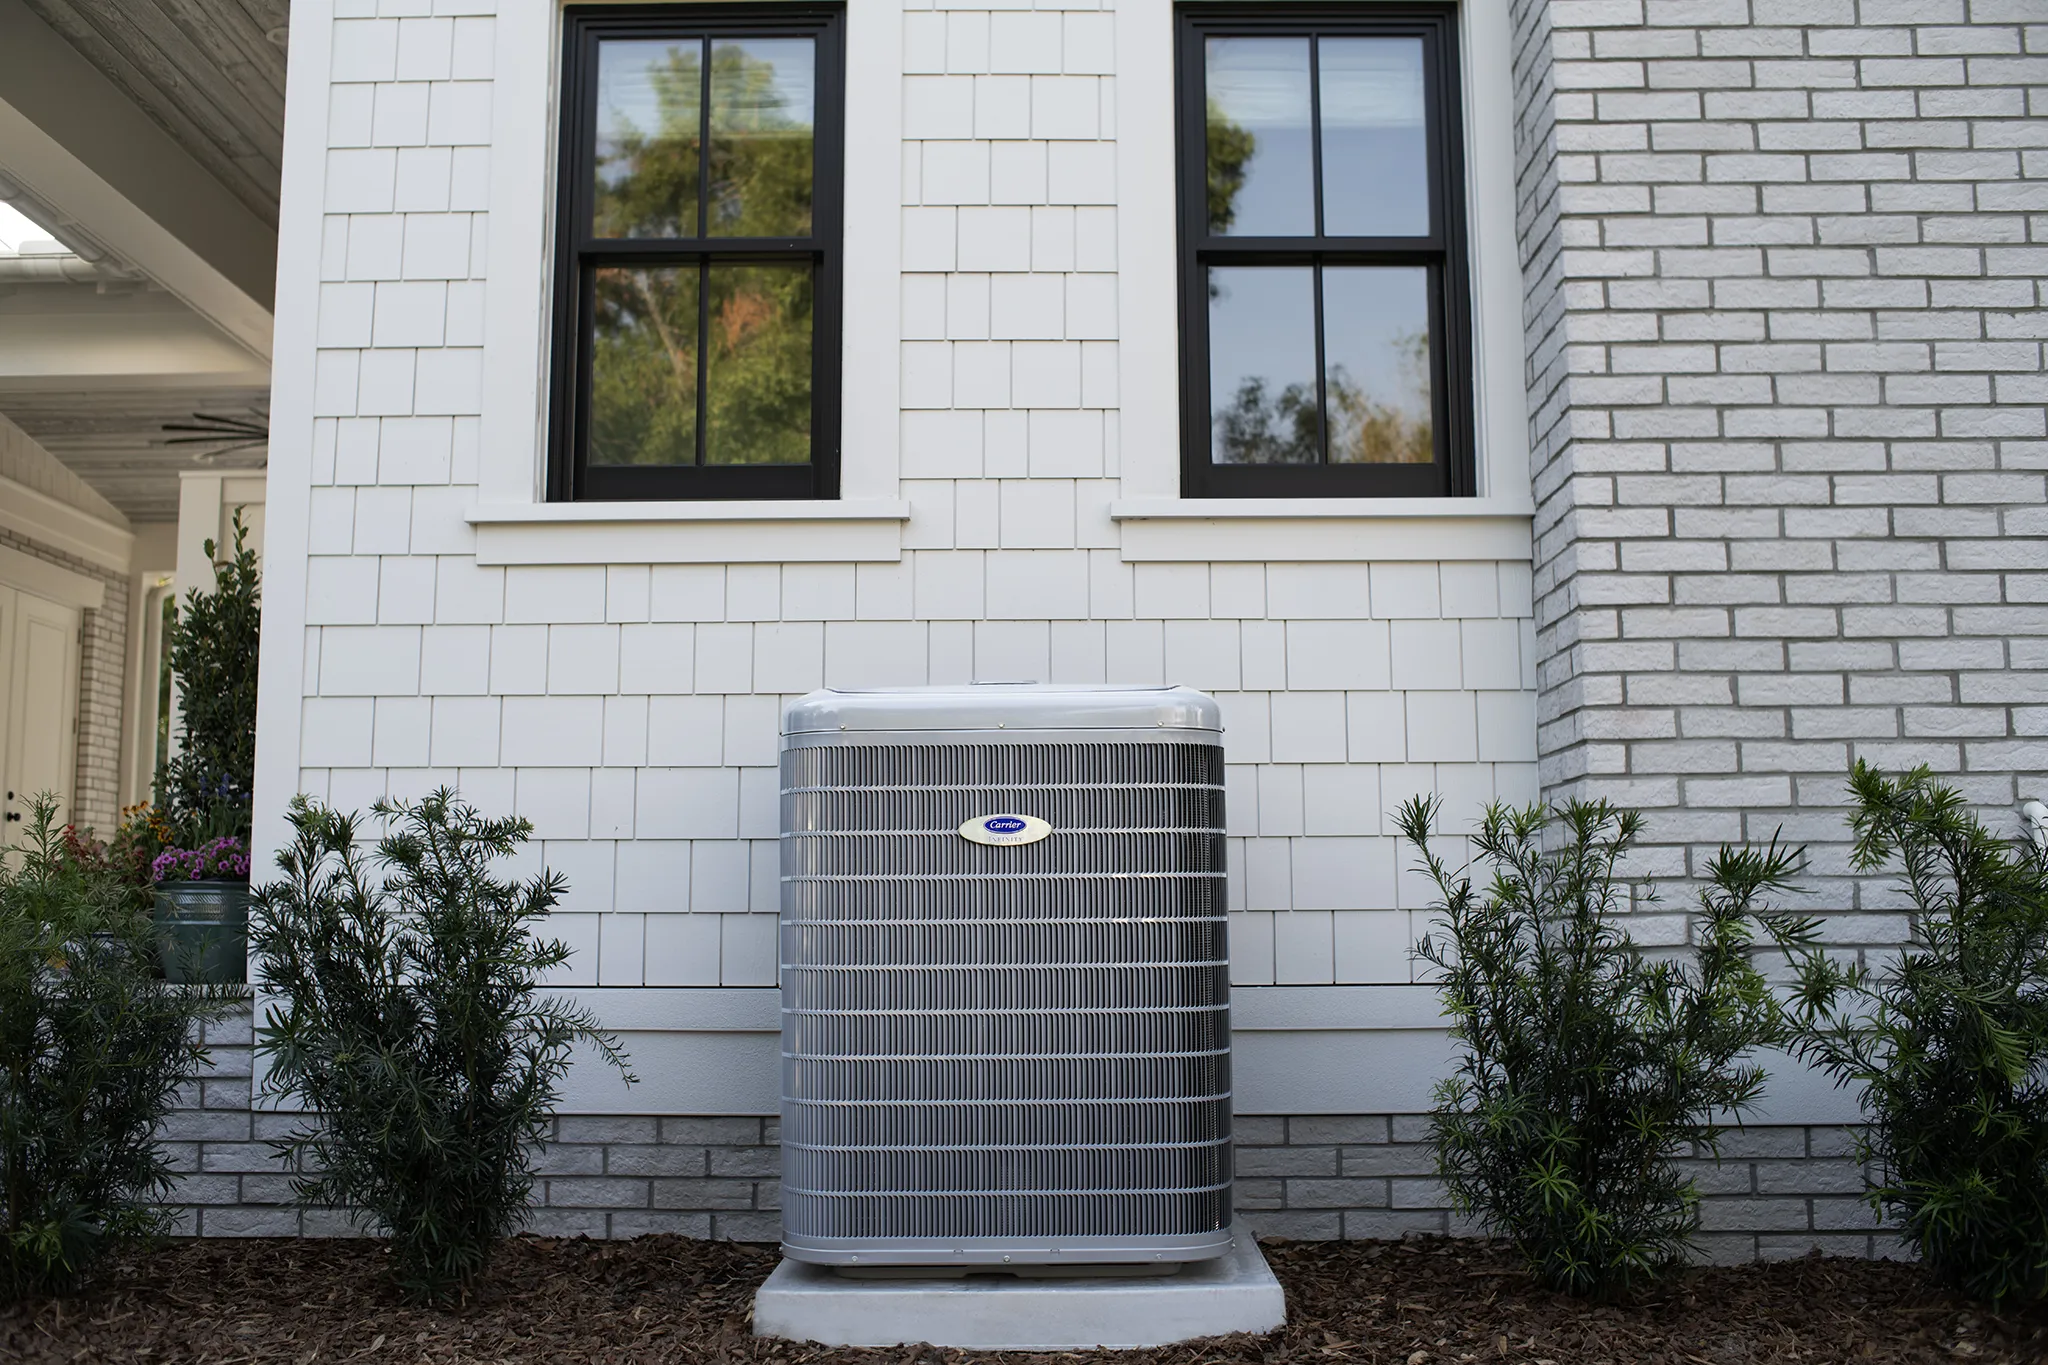 Heat pumps are growing in popularity across the Massachusetts. Contact CPS HVAC for installation, quotes and rebates available in your area.